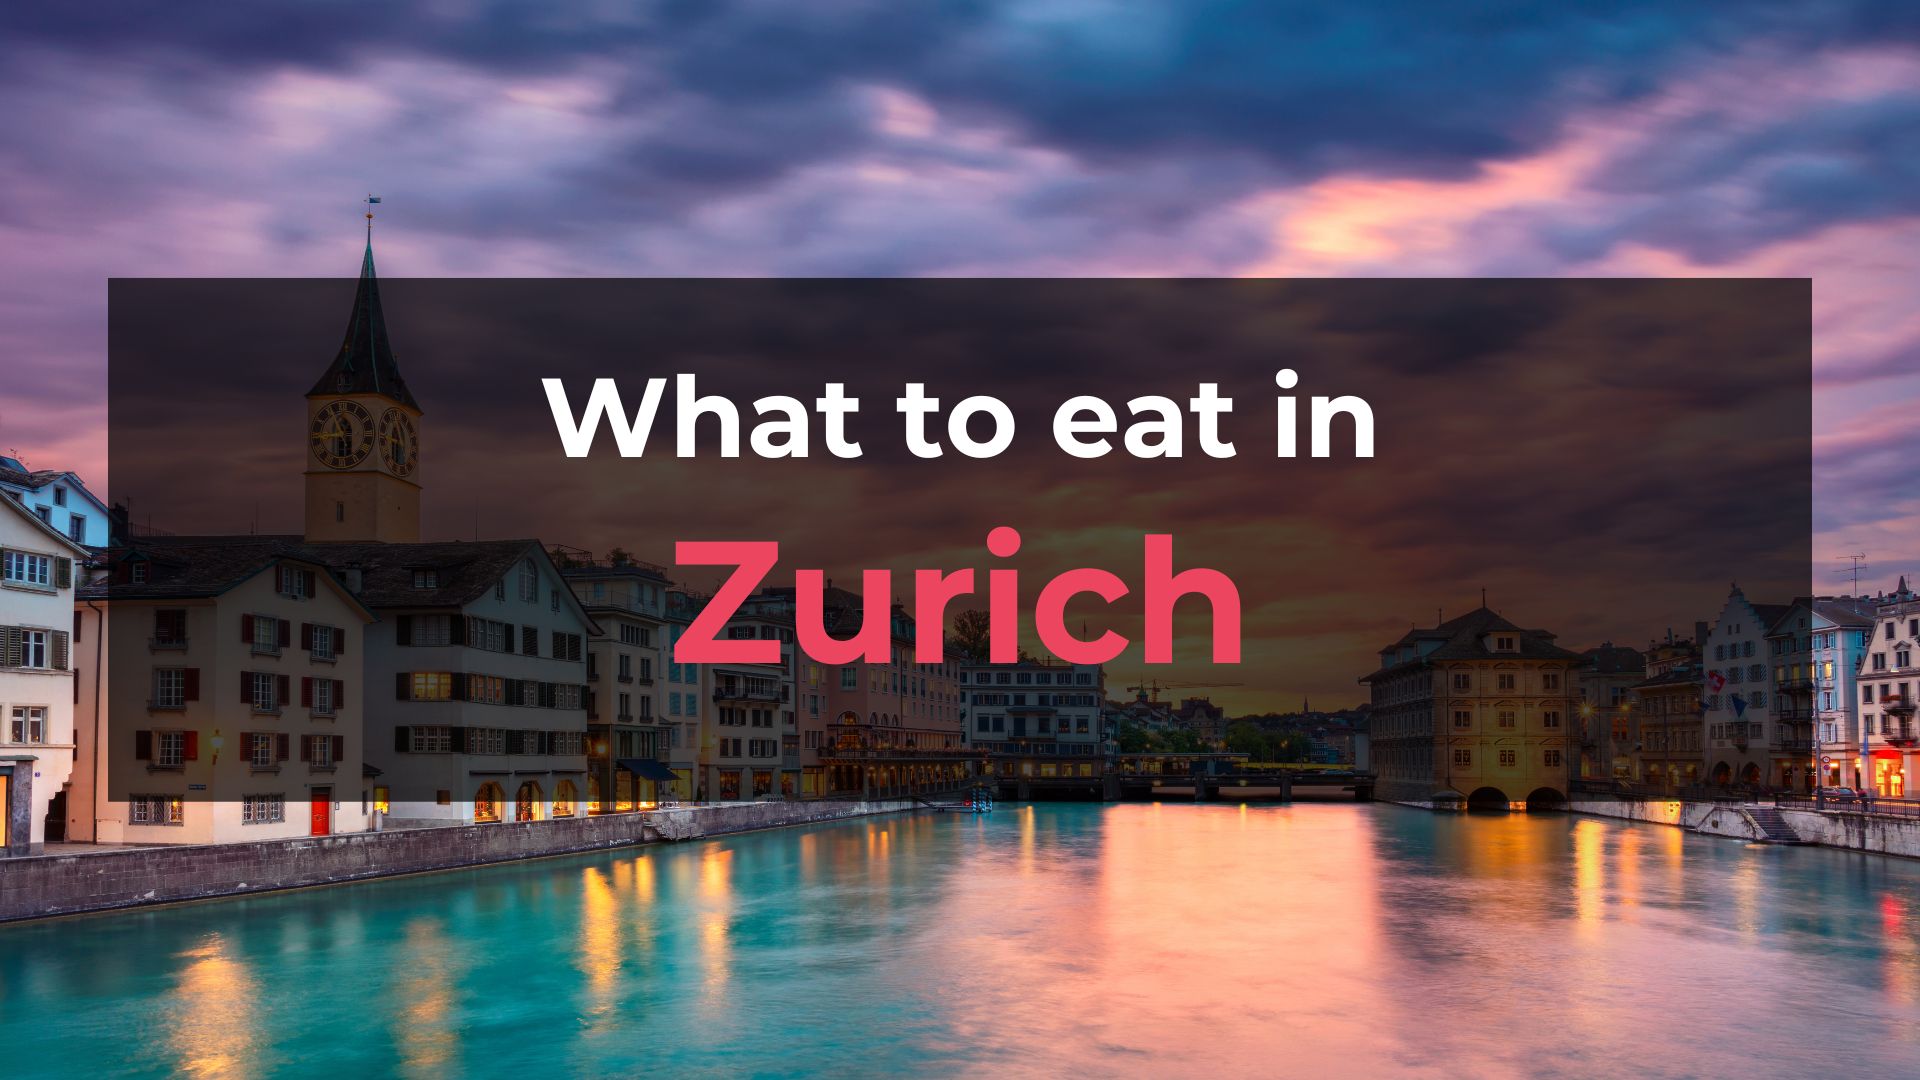 Read more about the article What to Eat in Zurich: 10 Foods You Should Try